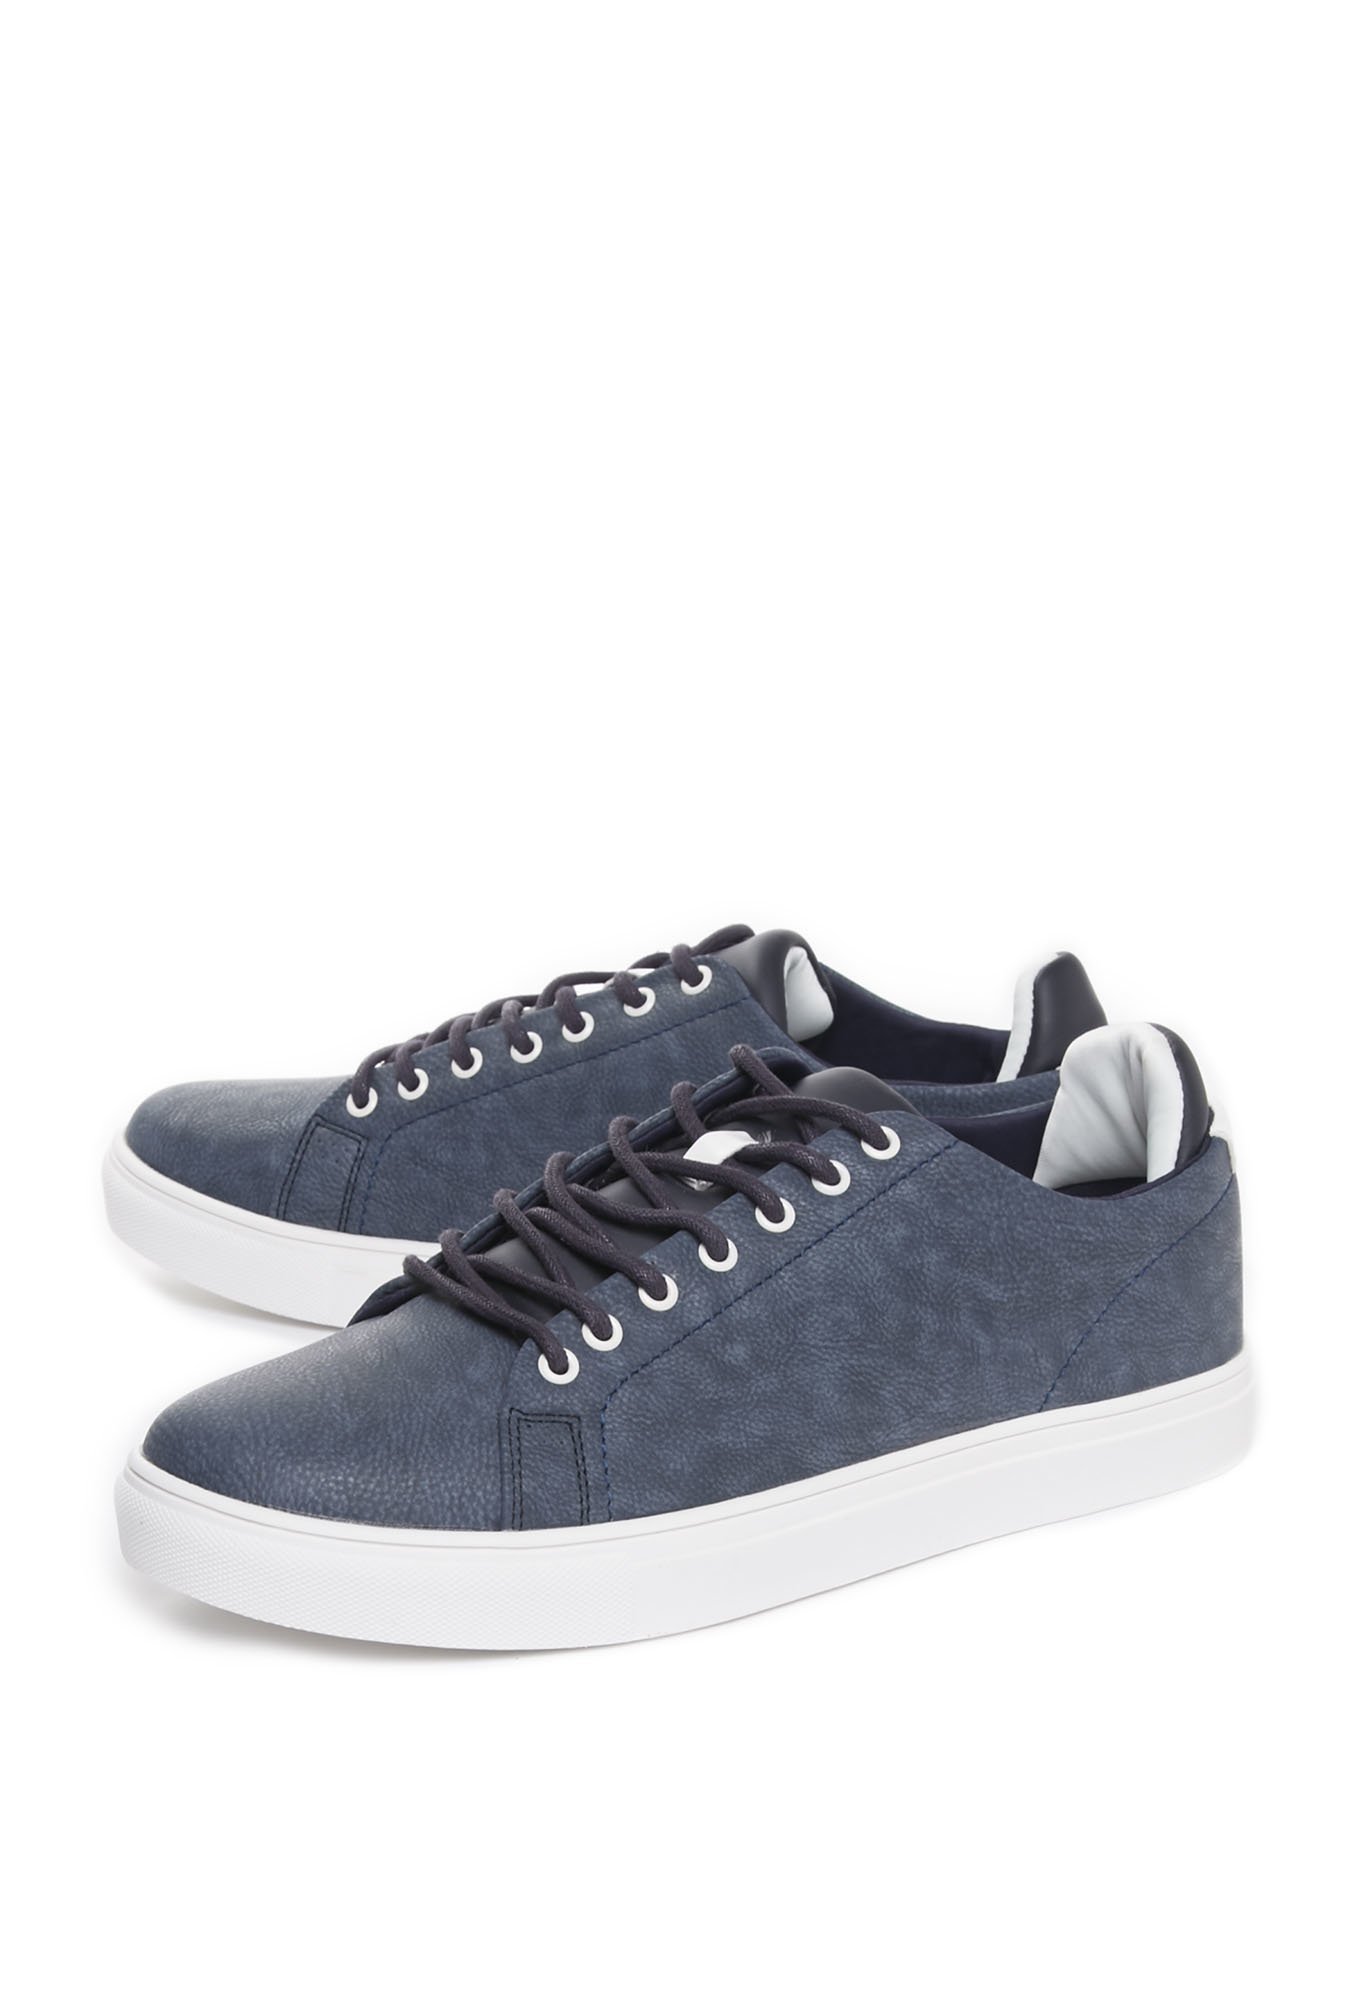 soleplay casual shoes